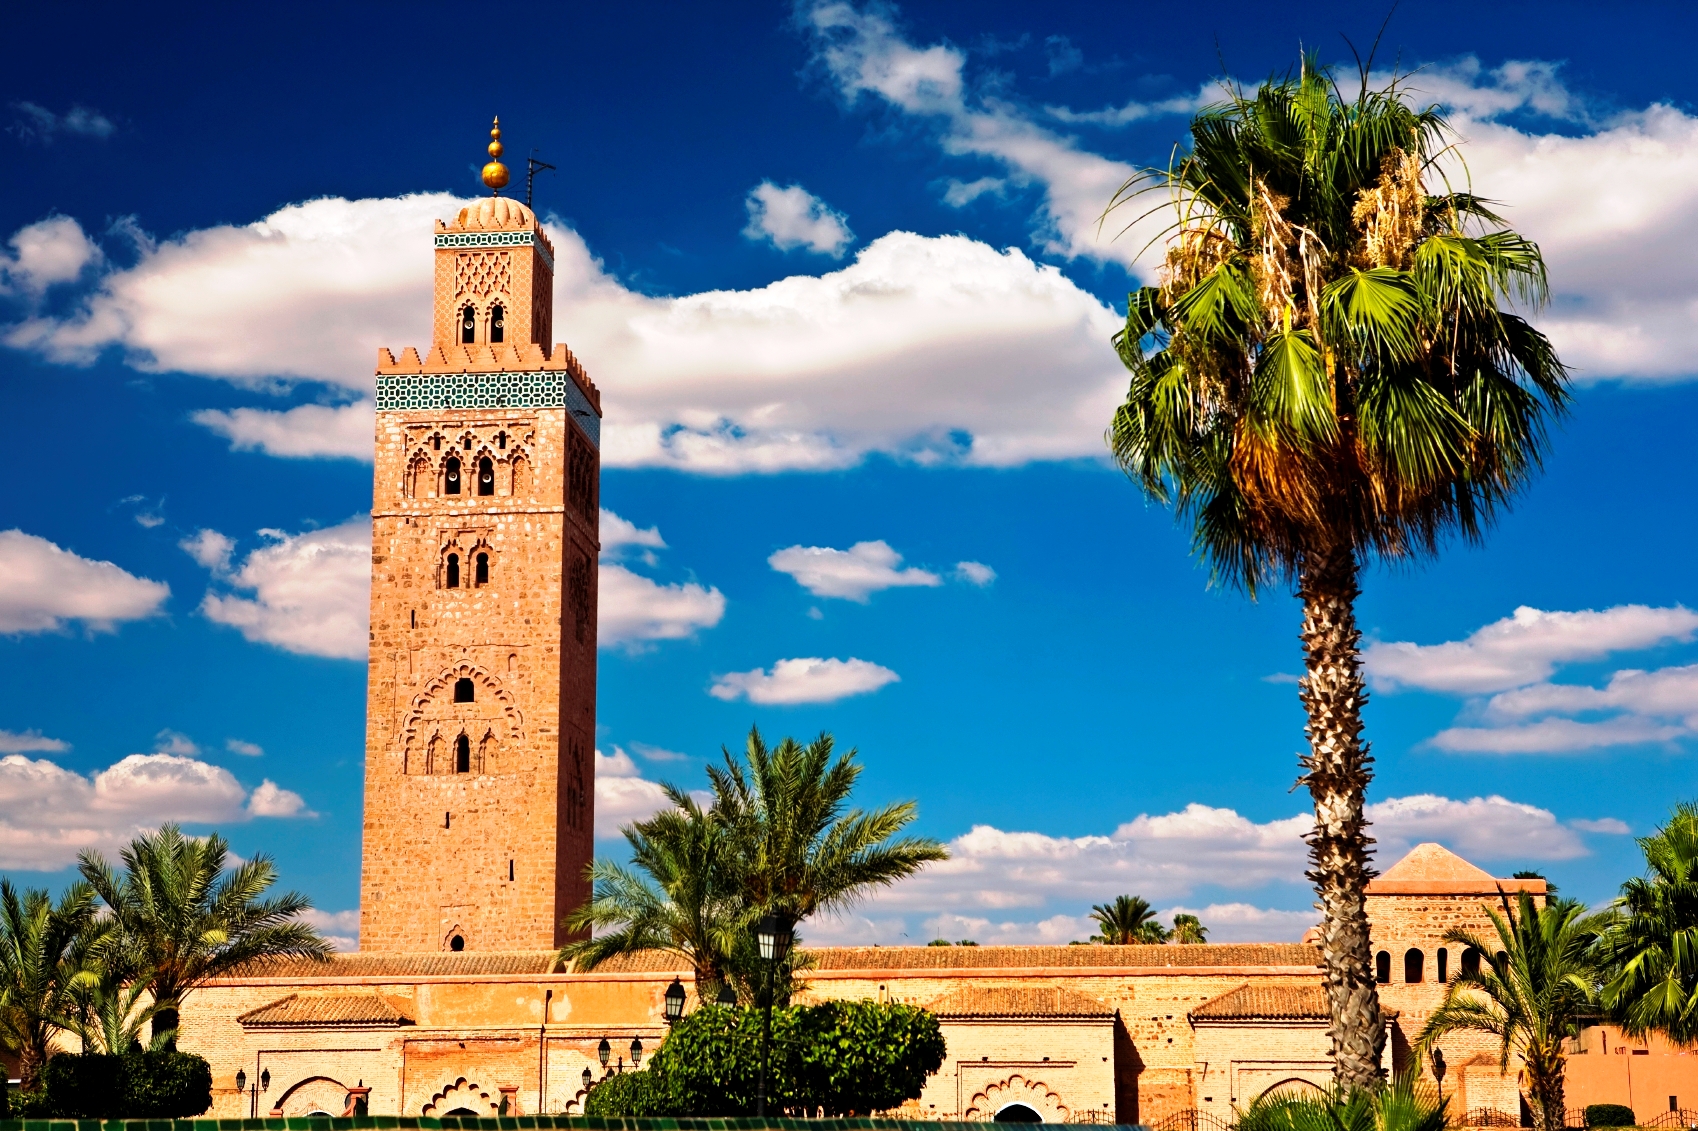 08 days Morocco New Year tour from Casablanca to discover the Imperial cities of Rabat, Meknes, Fez & Marrakech